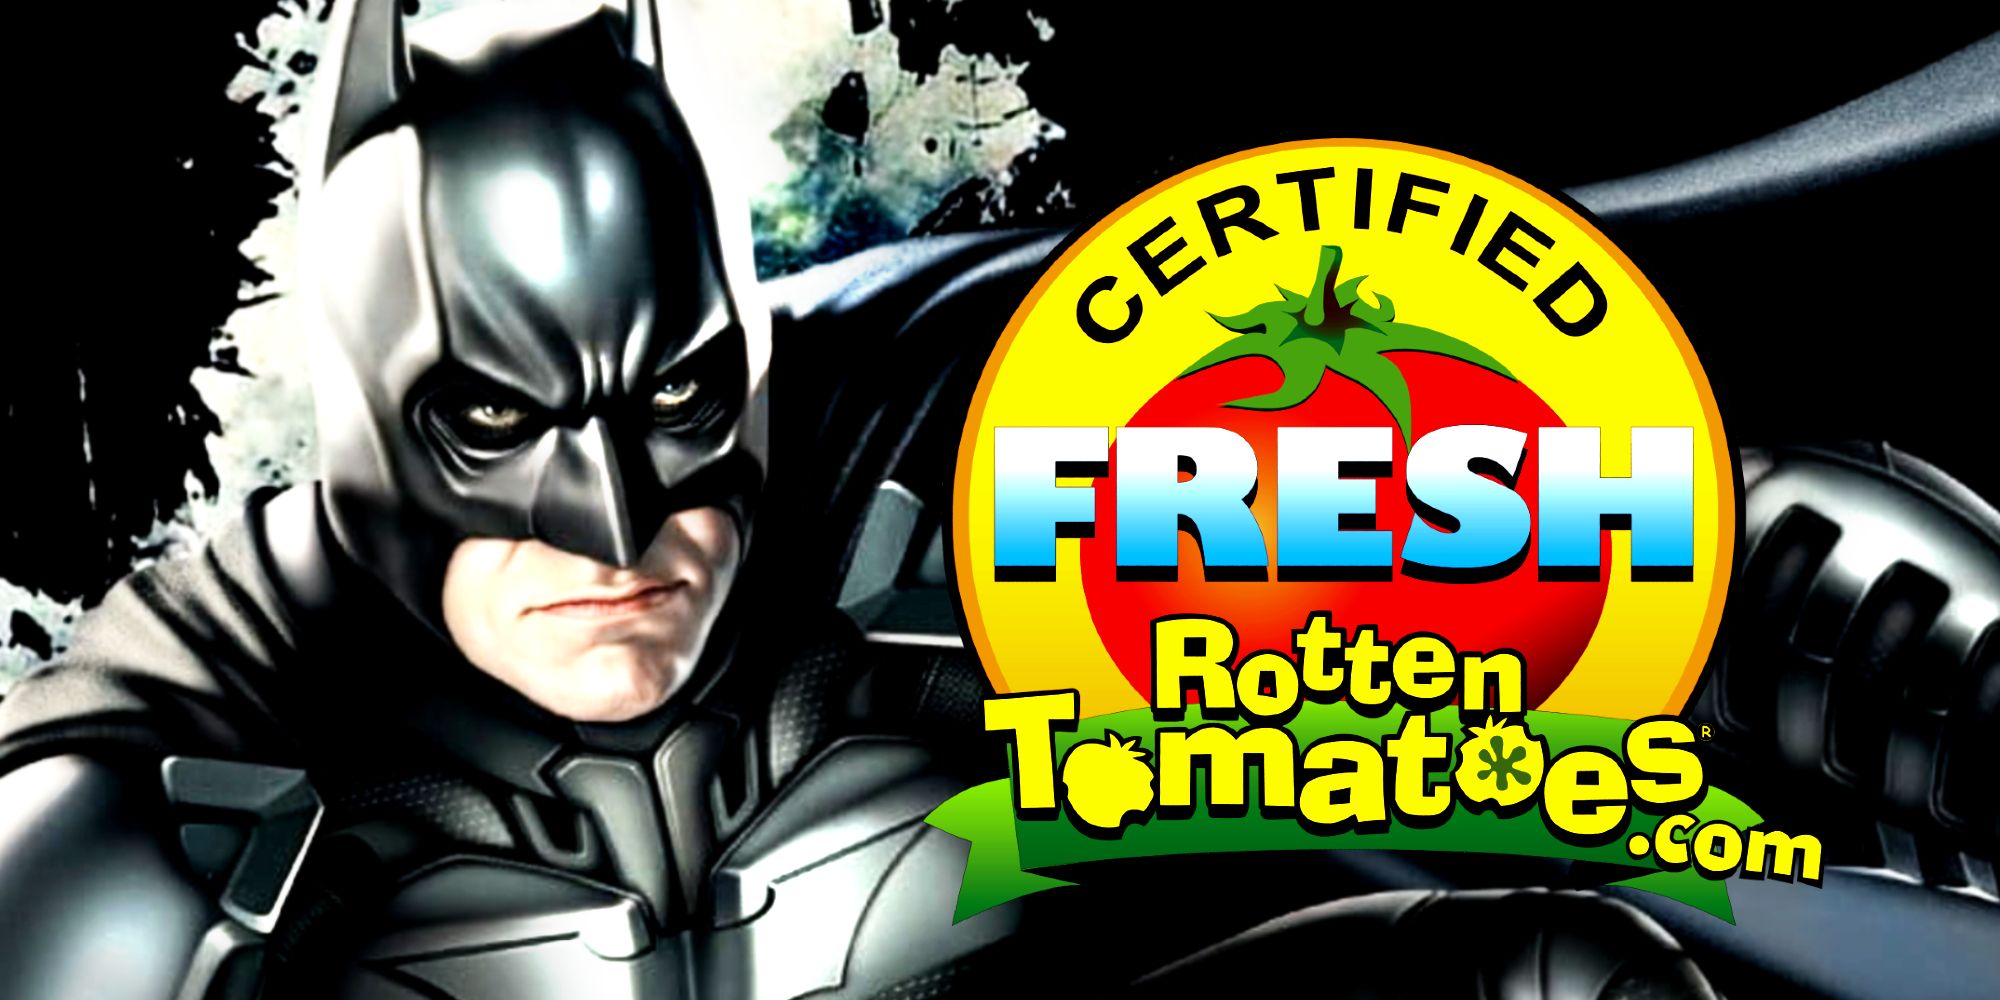 Christian Bale's Batman Fighting in Christopher Nolan's The Dark Knight and the Rotten Tomatoes Certified Fresh Stamp